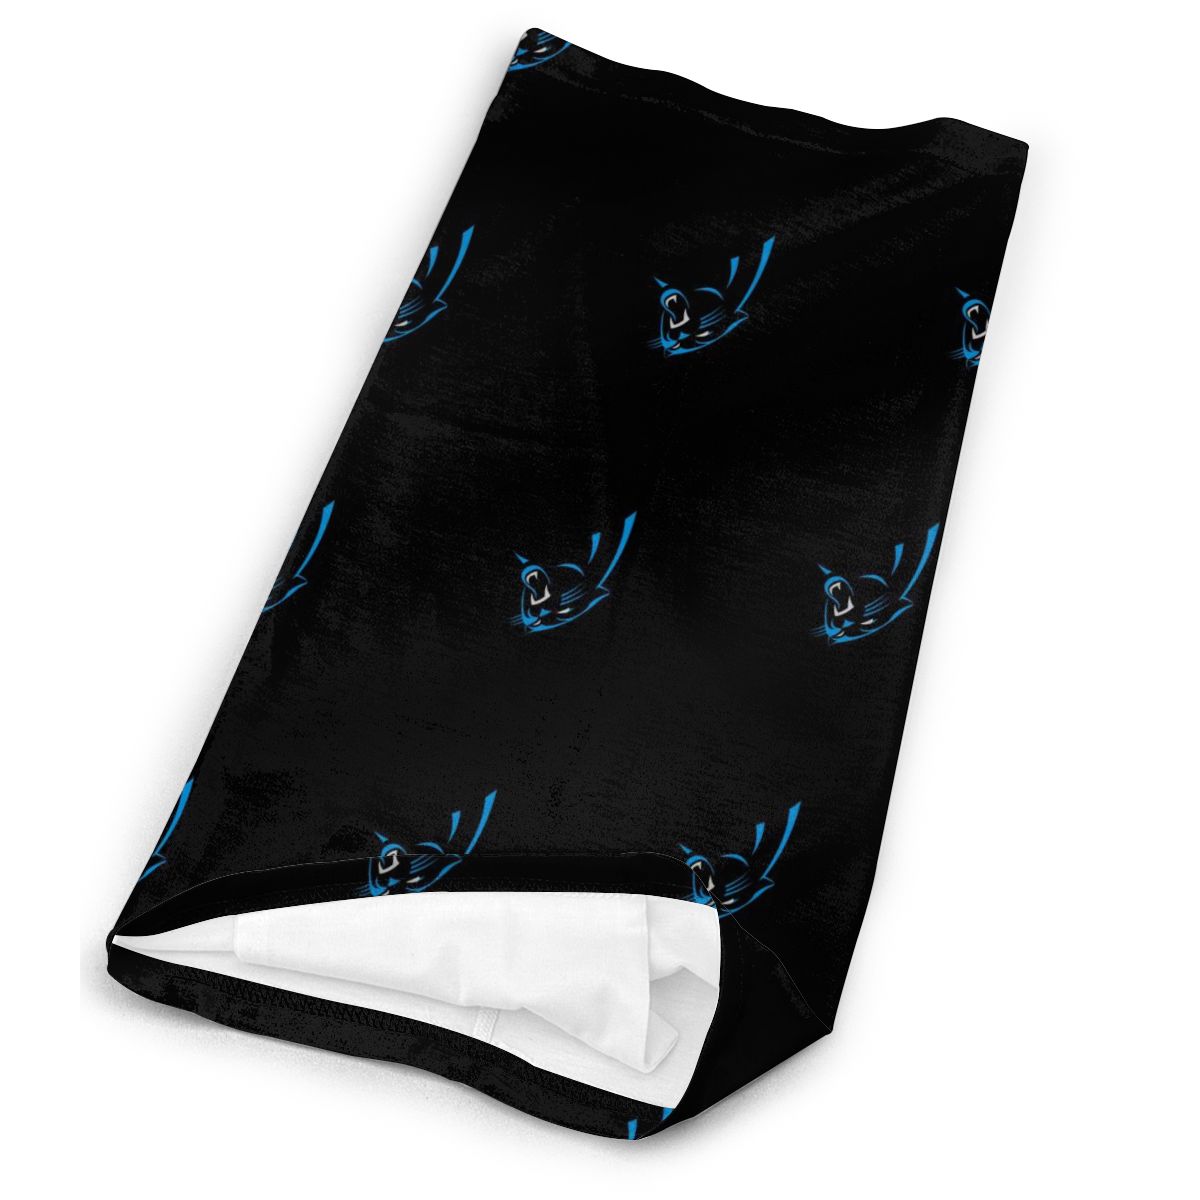 Reusble Mouth Cover Bandanas Carolina Panthers Variety Head Scarf Face Mask With PM 2.5 Filter